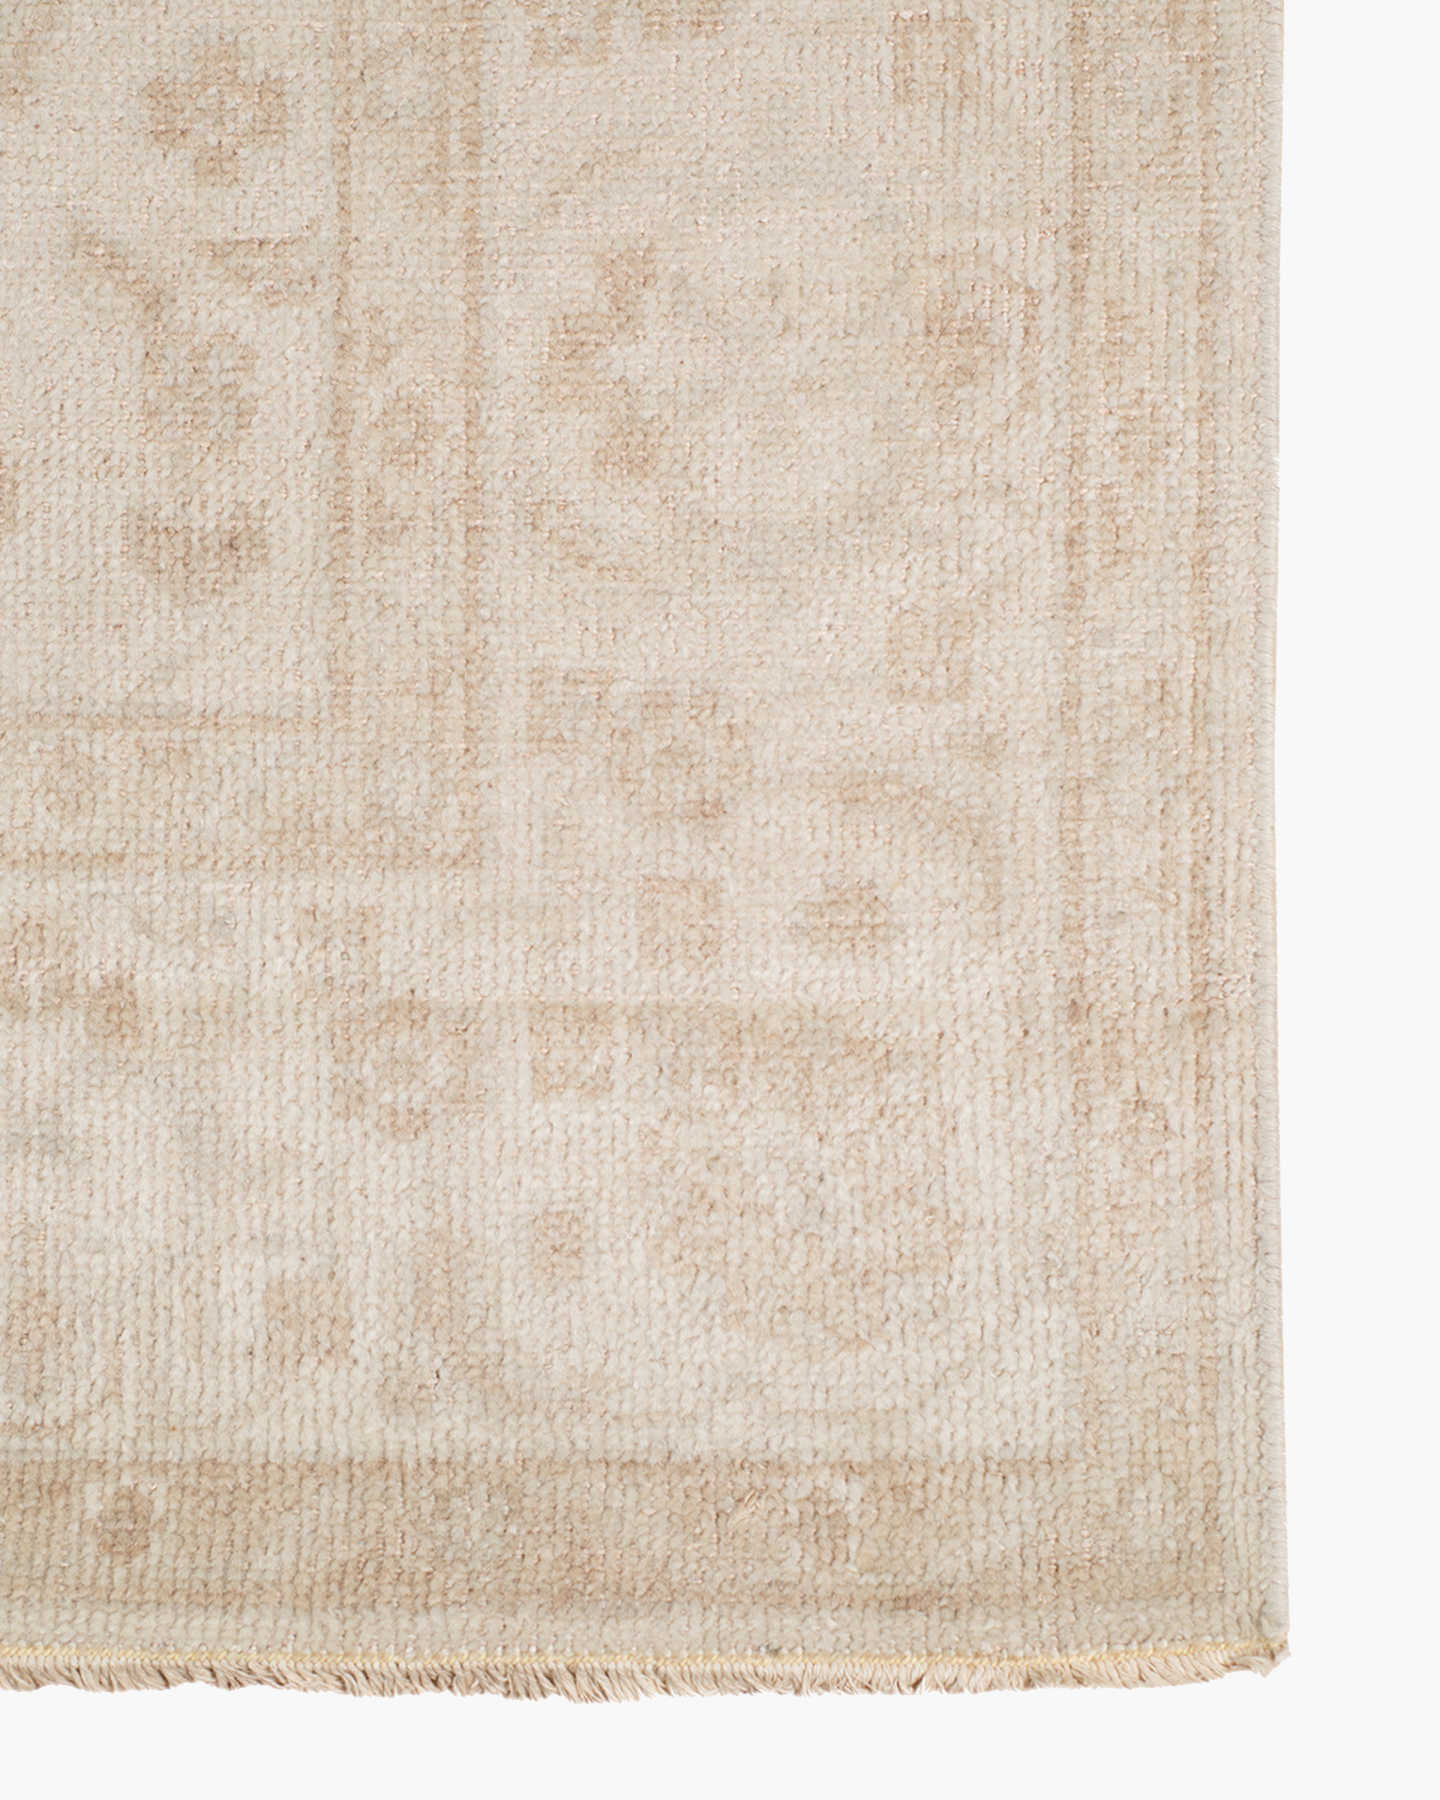 Dinah Hand-Knotted Wool Rug - Ivory - 1 - Thumbnail